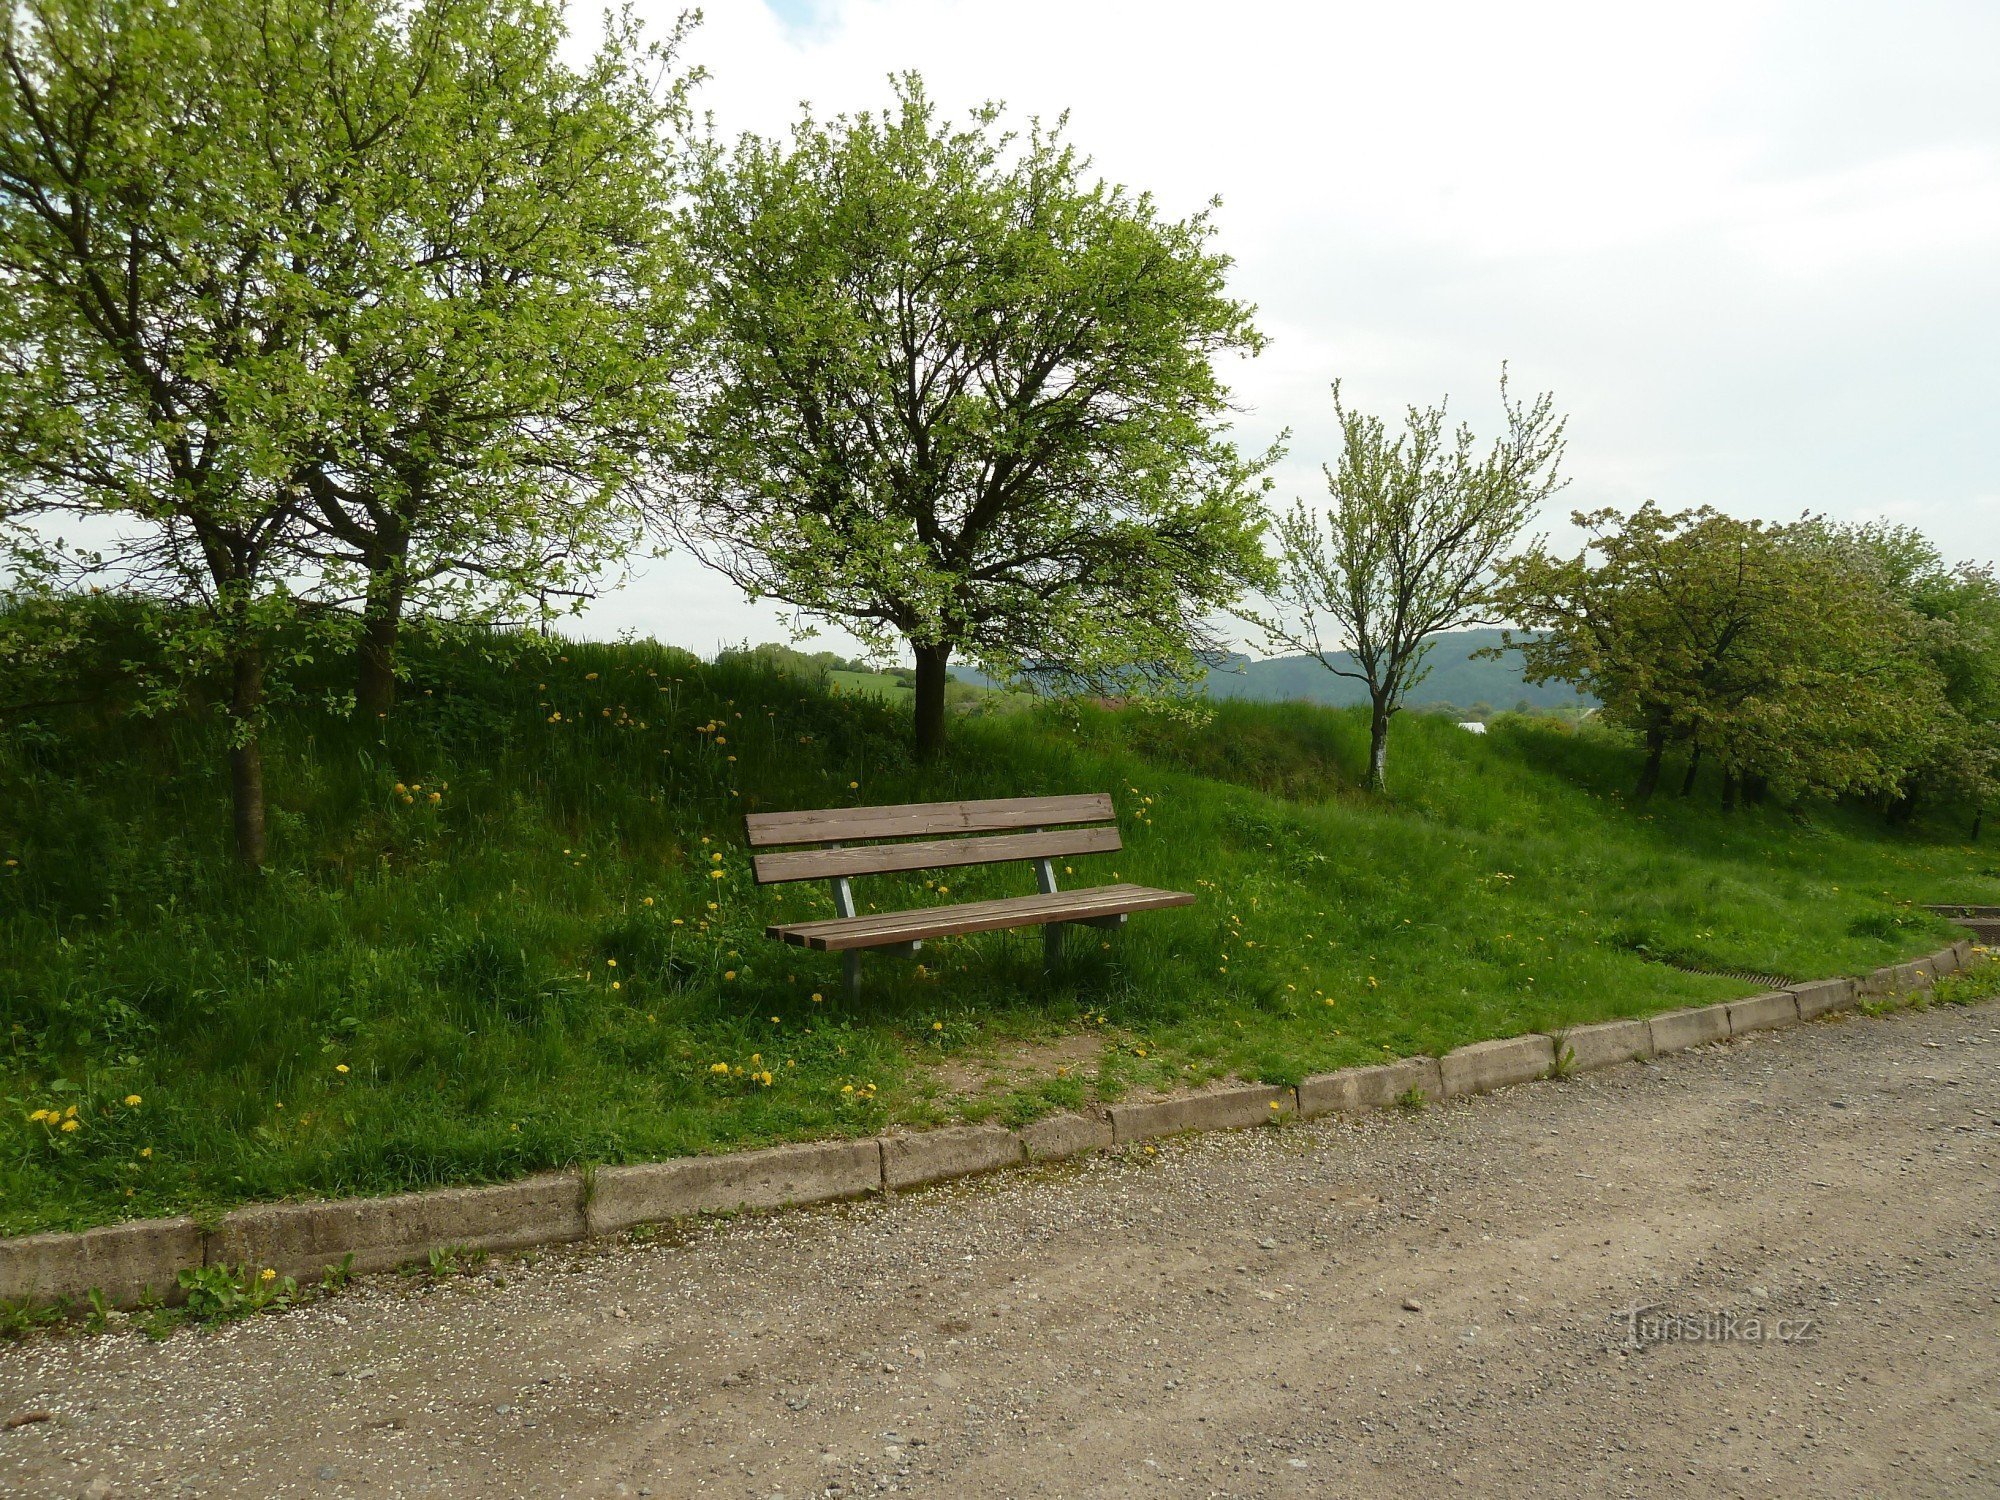 bench at the crossroads